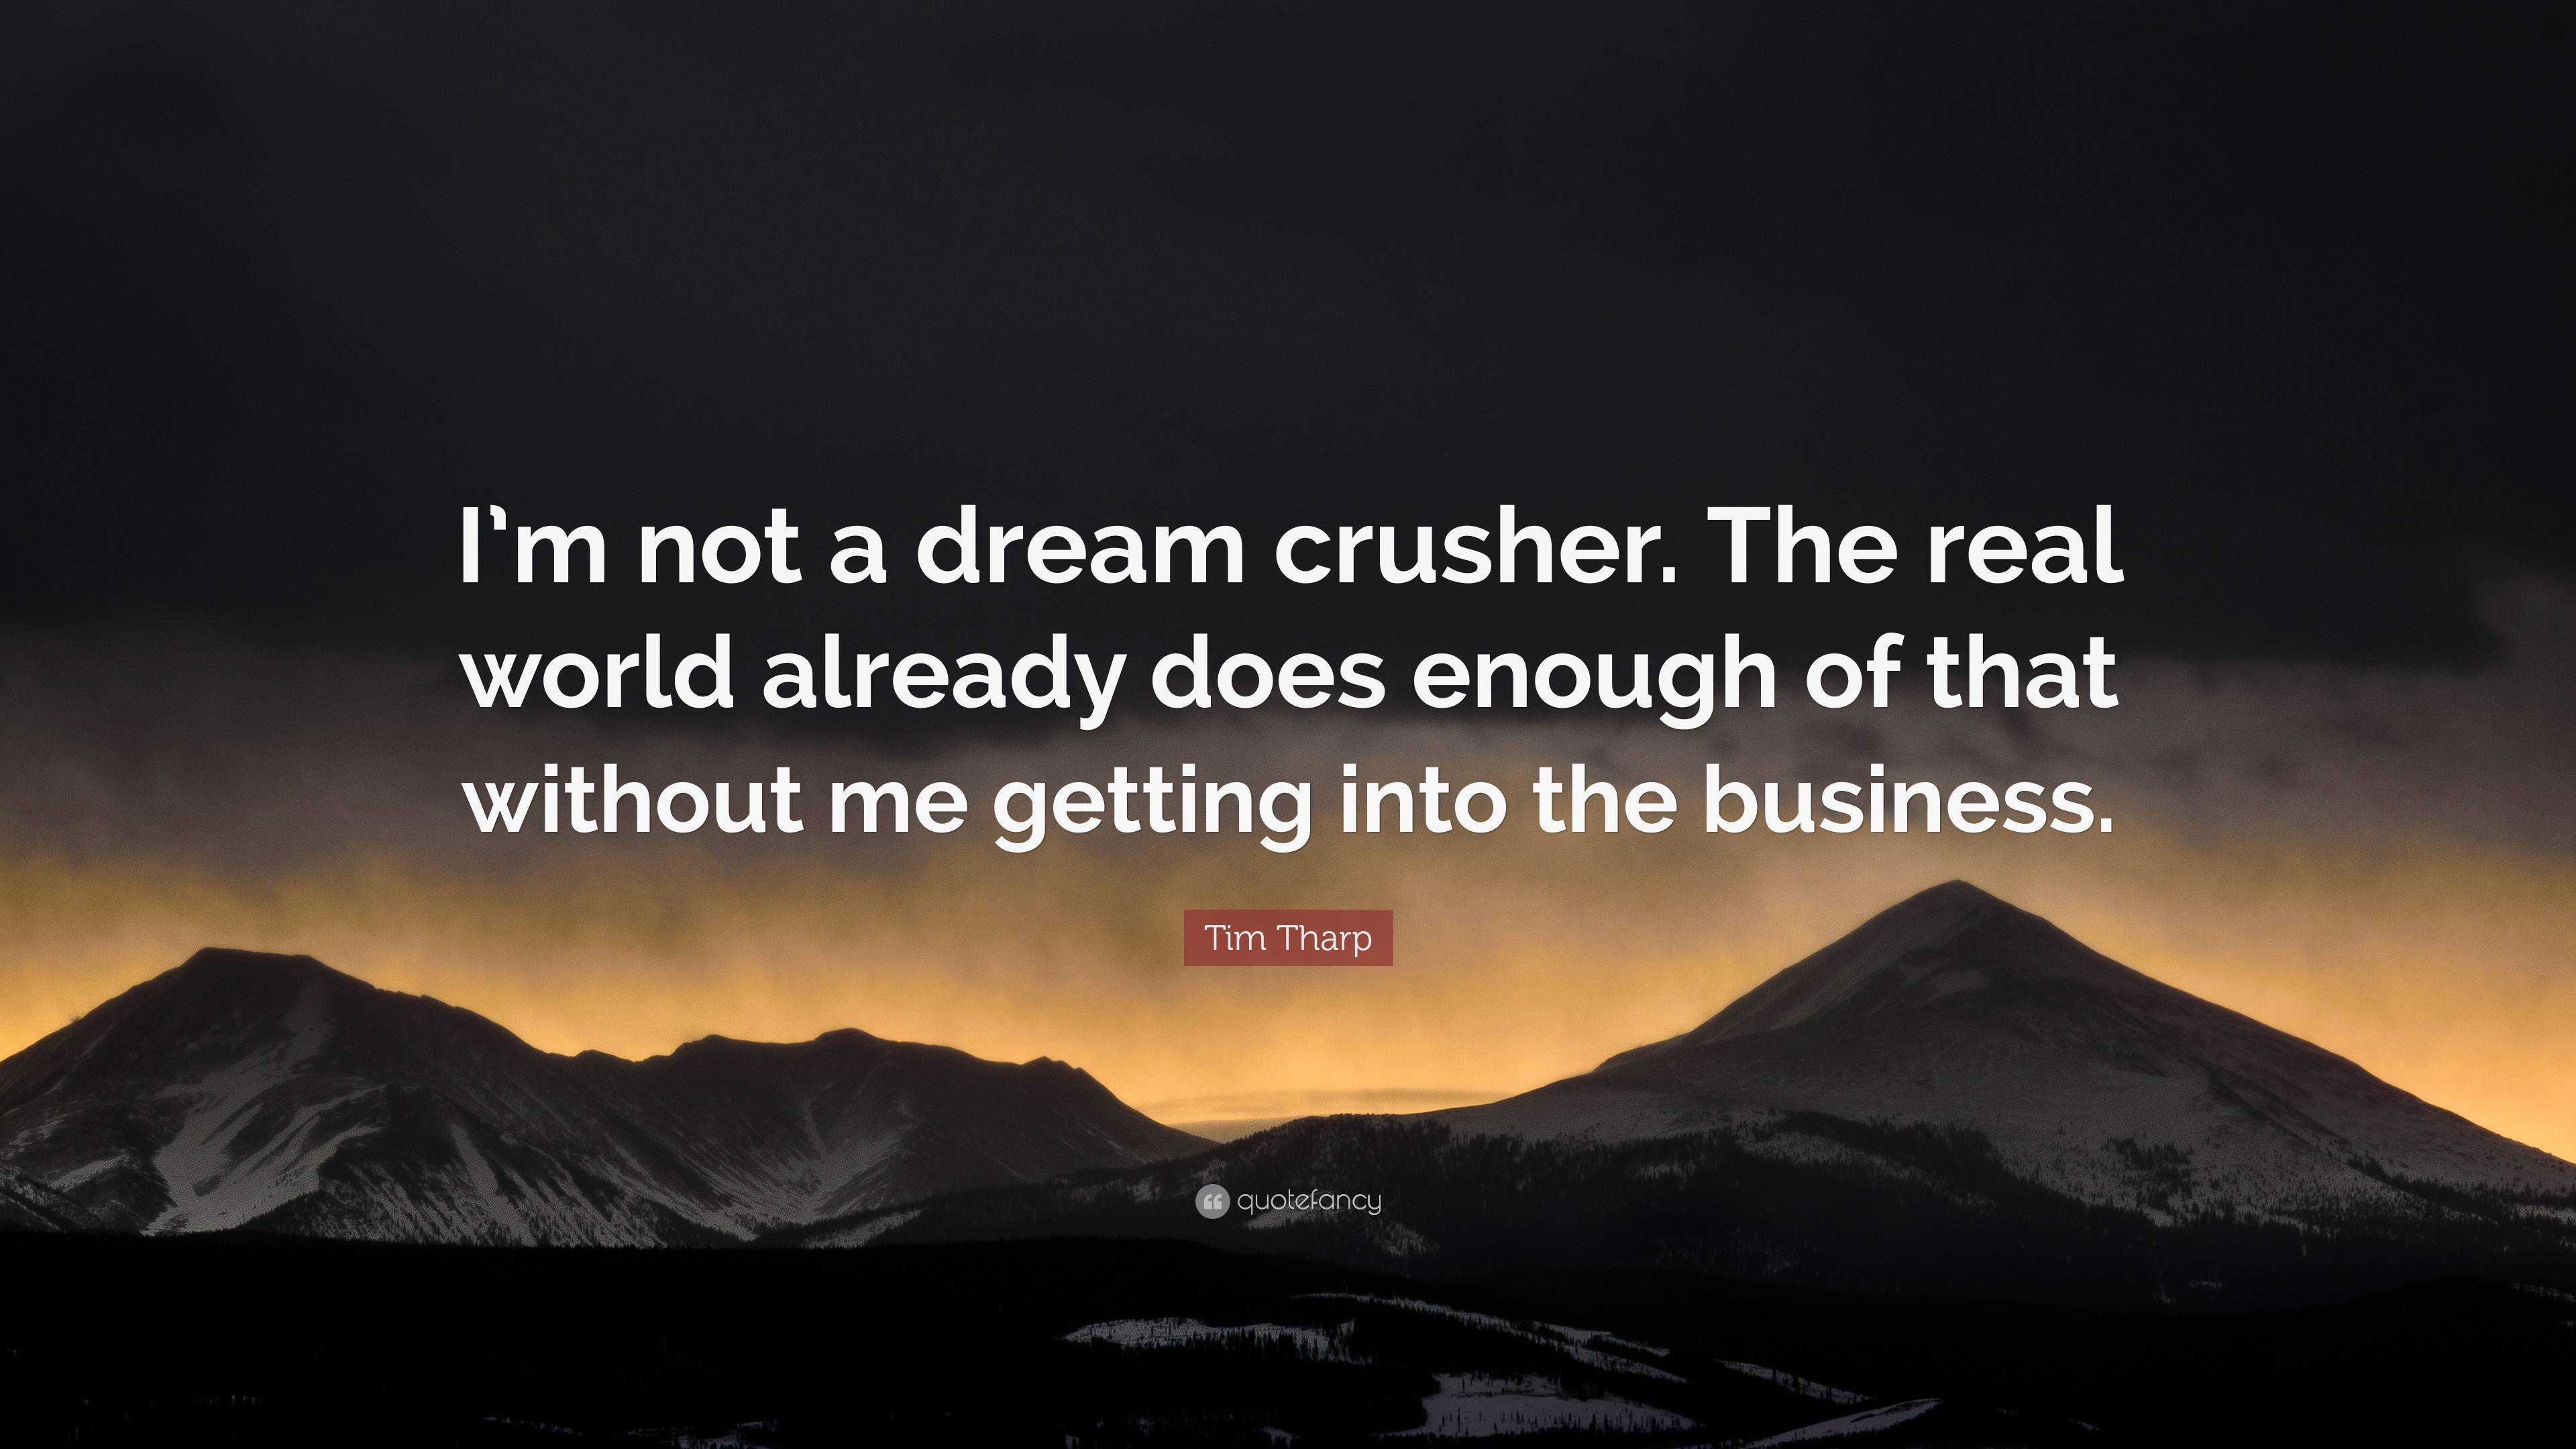 https://quotefancy.com/media/wallpaper/3840x2160/6520749-Tim-Tharp-Quote-I-m-not-a-dream-crusher-The-real-world-already.jpg